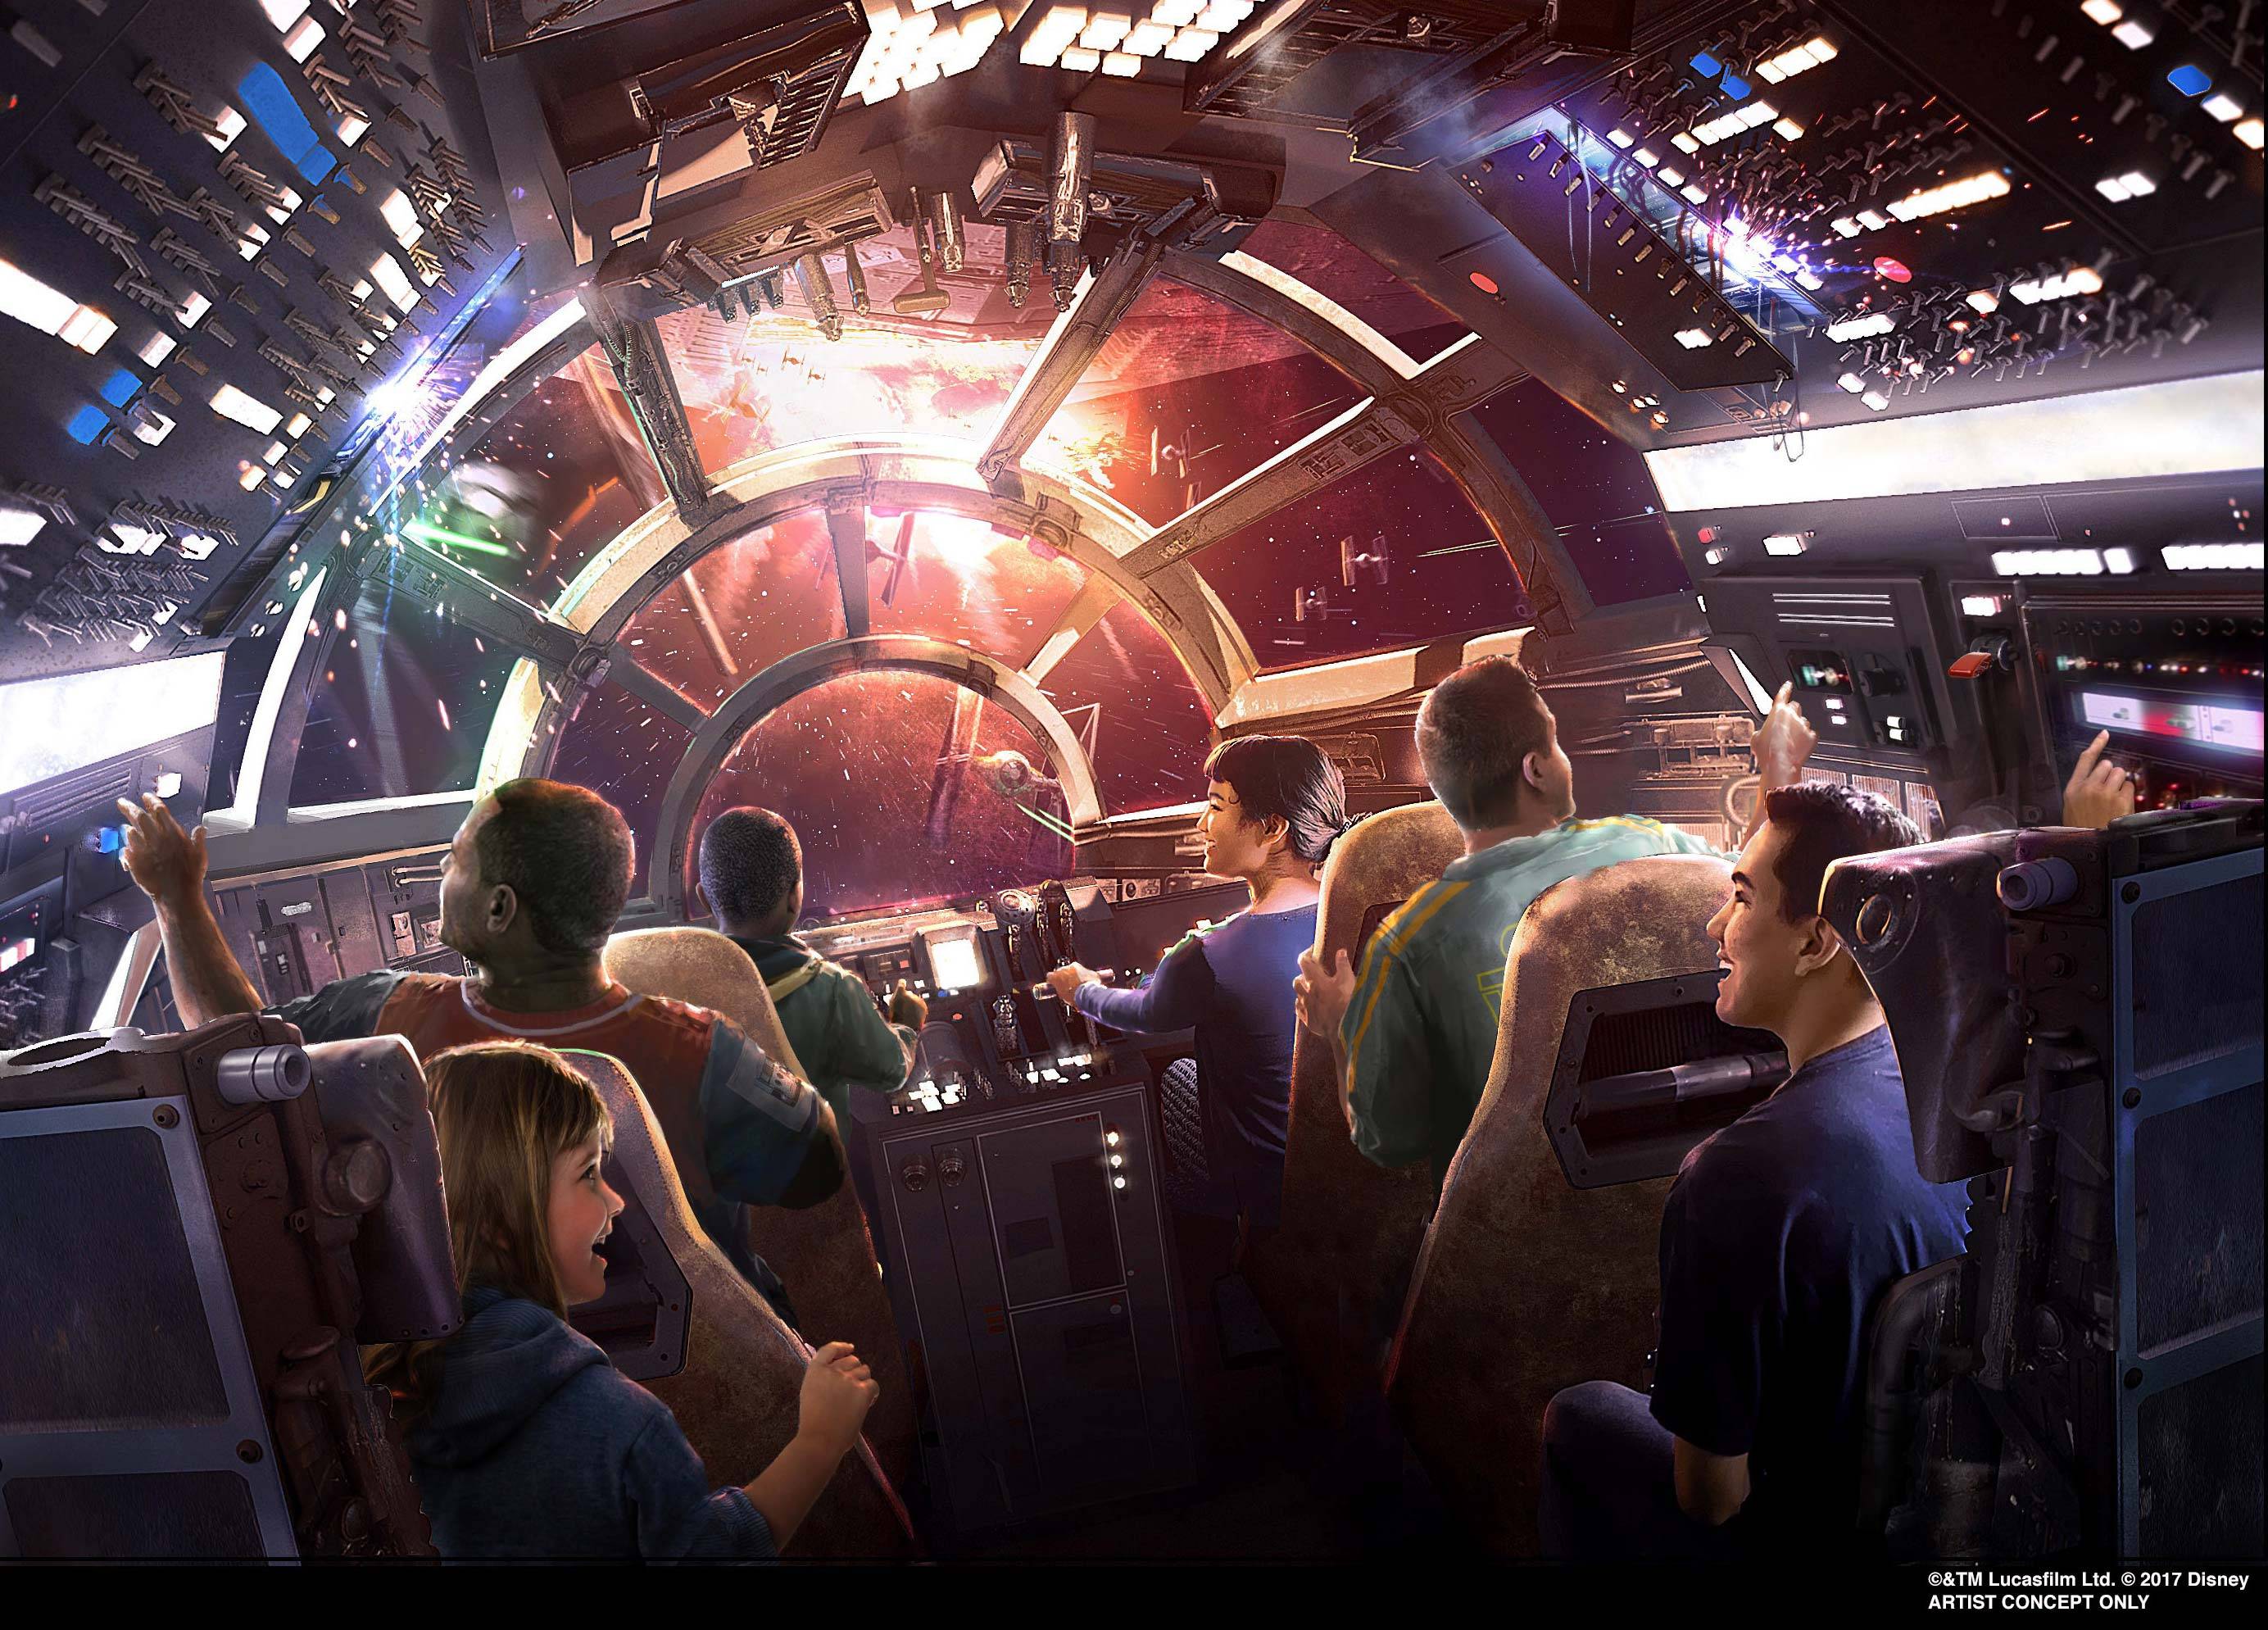 Concept art for Star Wars Galaxy's Edge rides